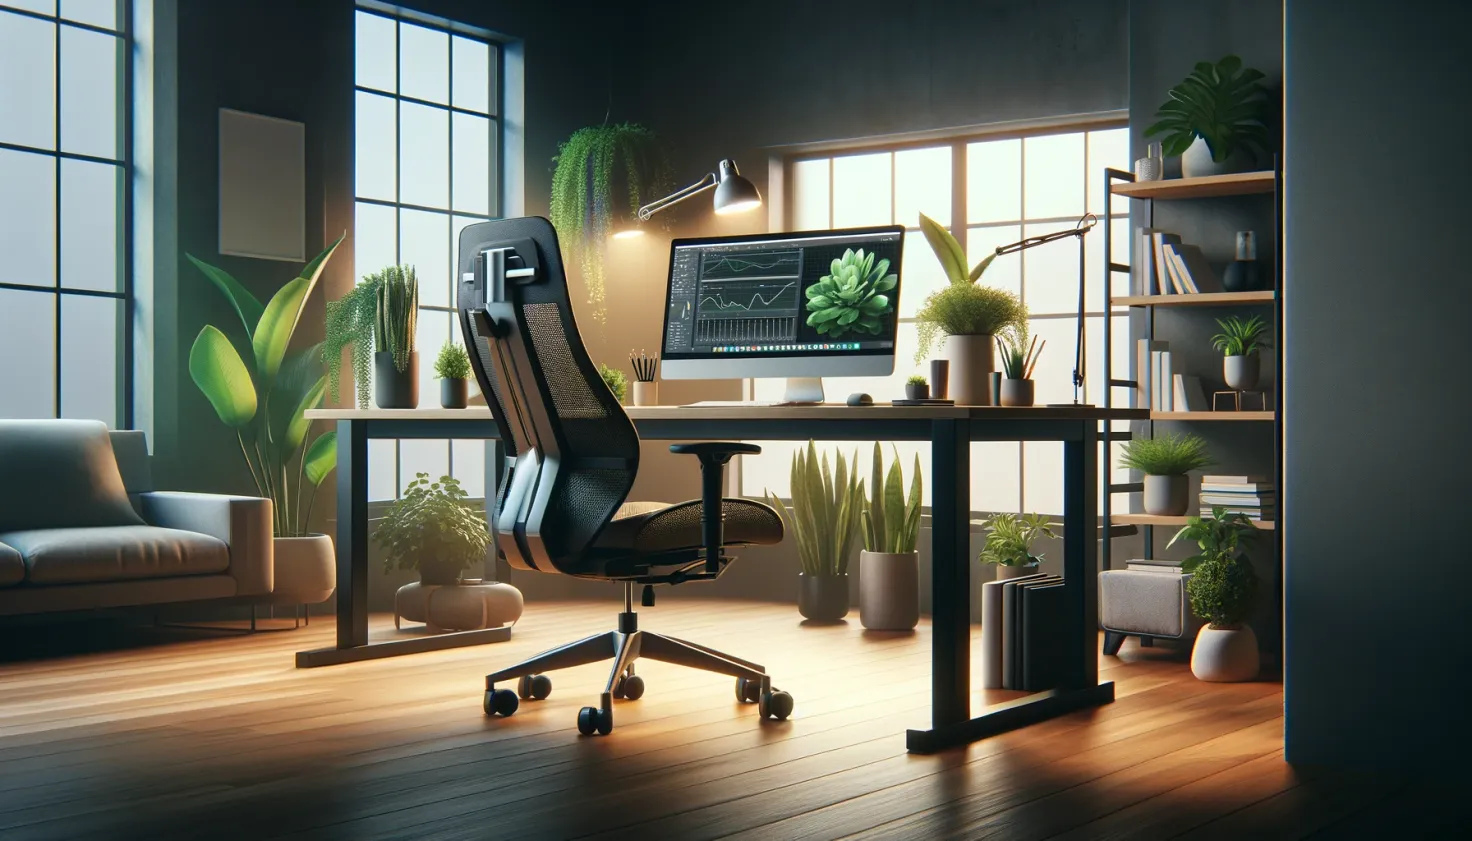 desk setup with ergonomic chair, computer with standing option, plants, ambient lighting